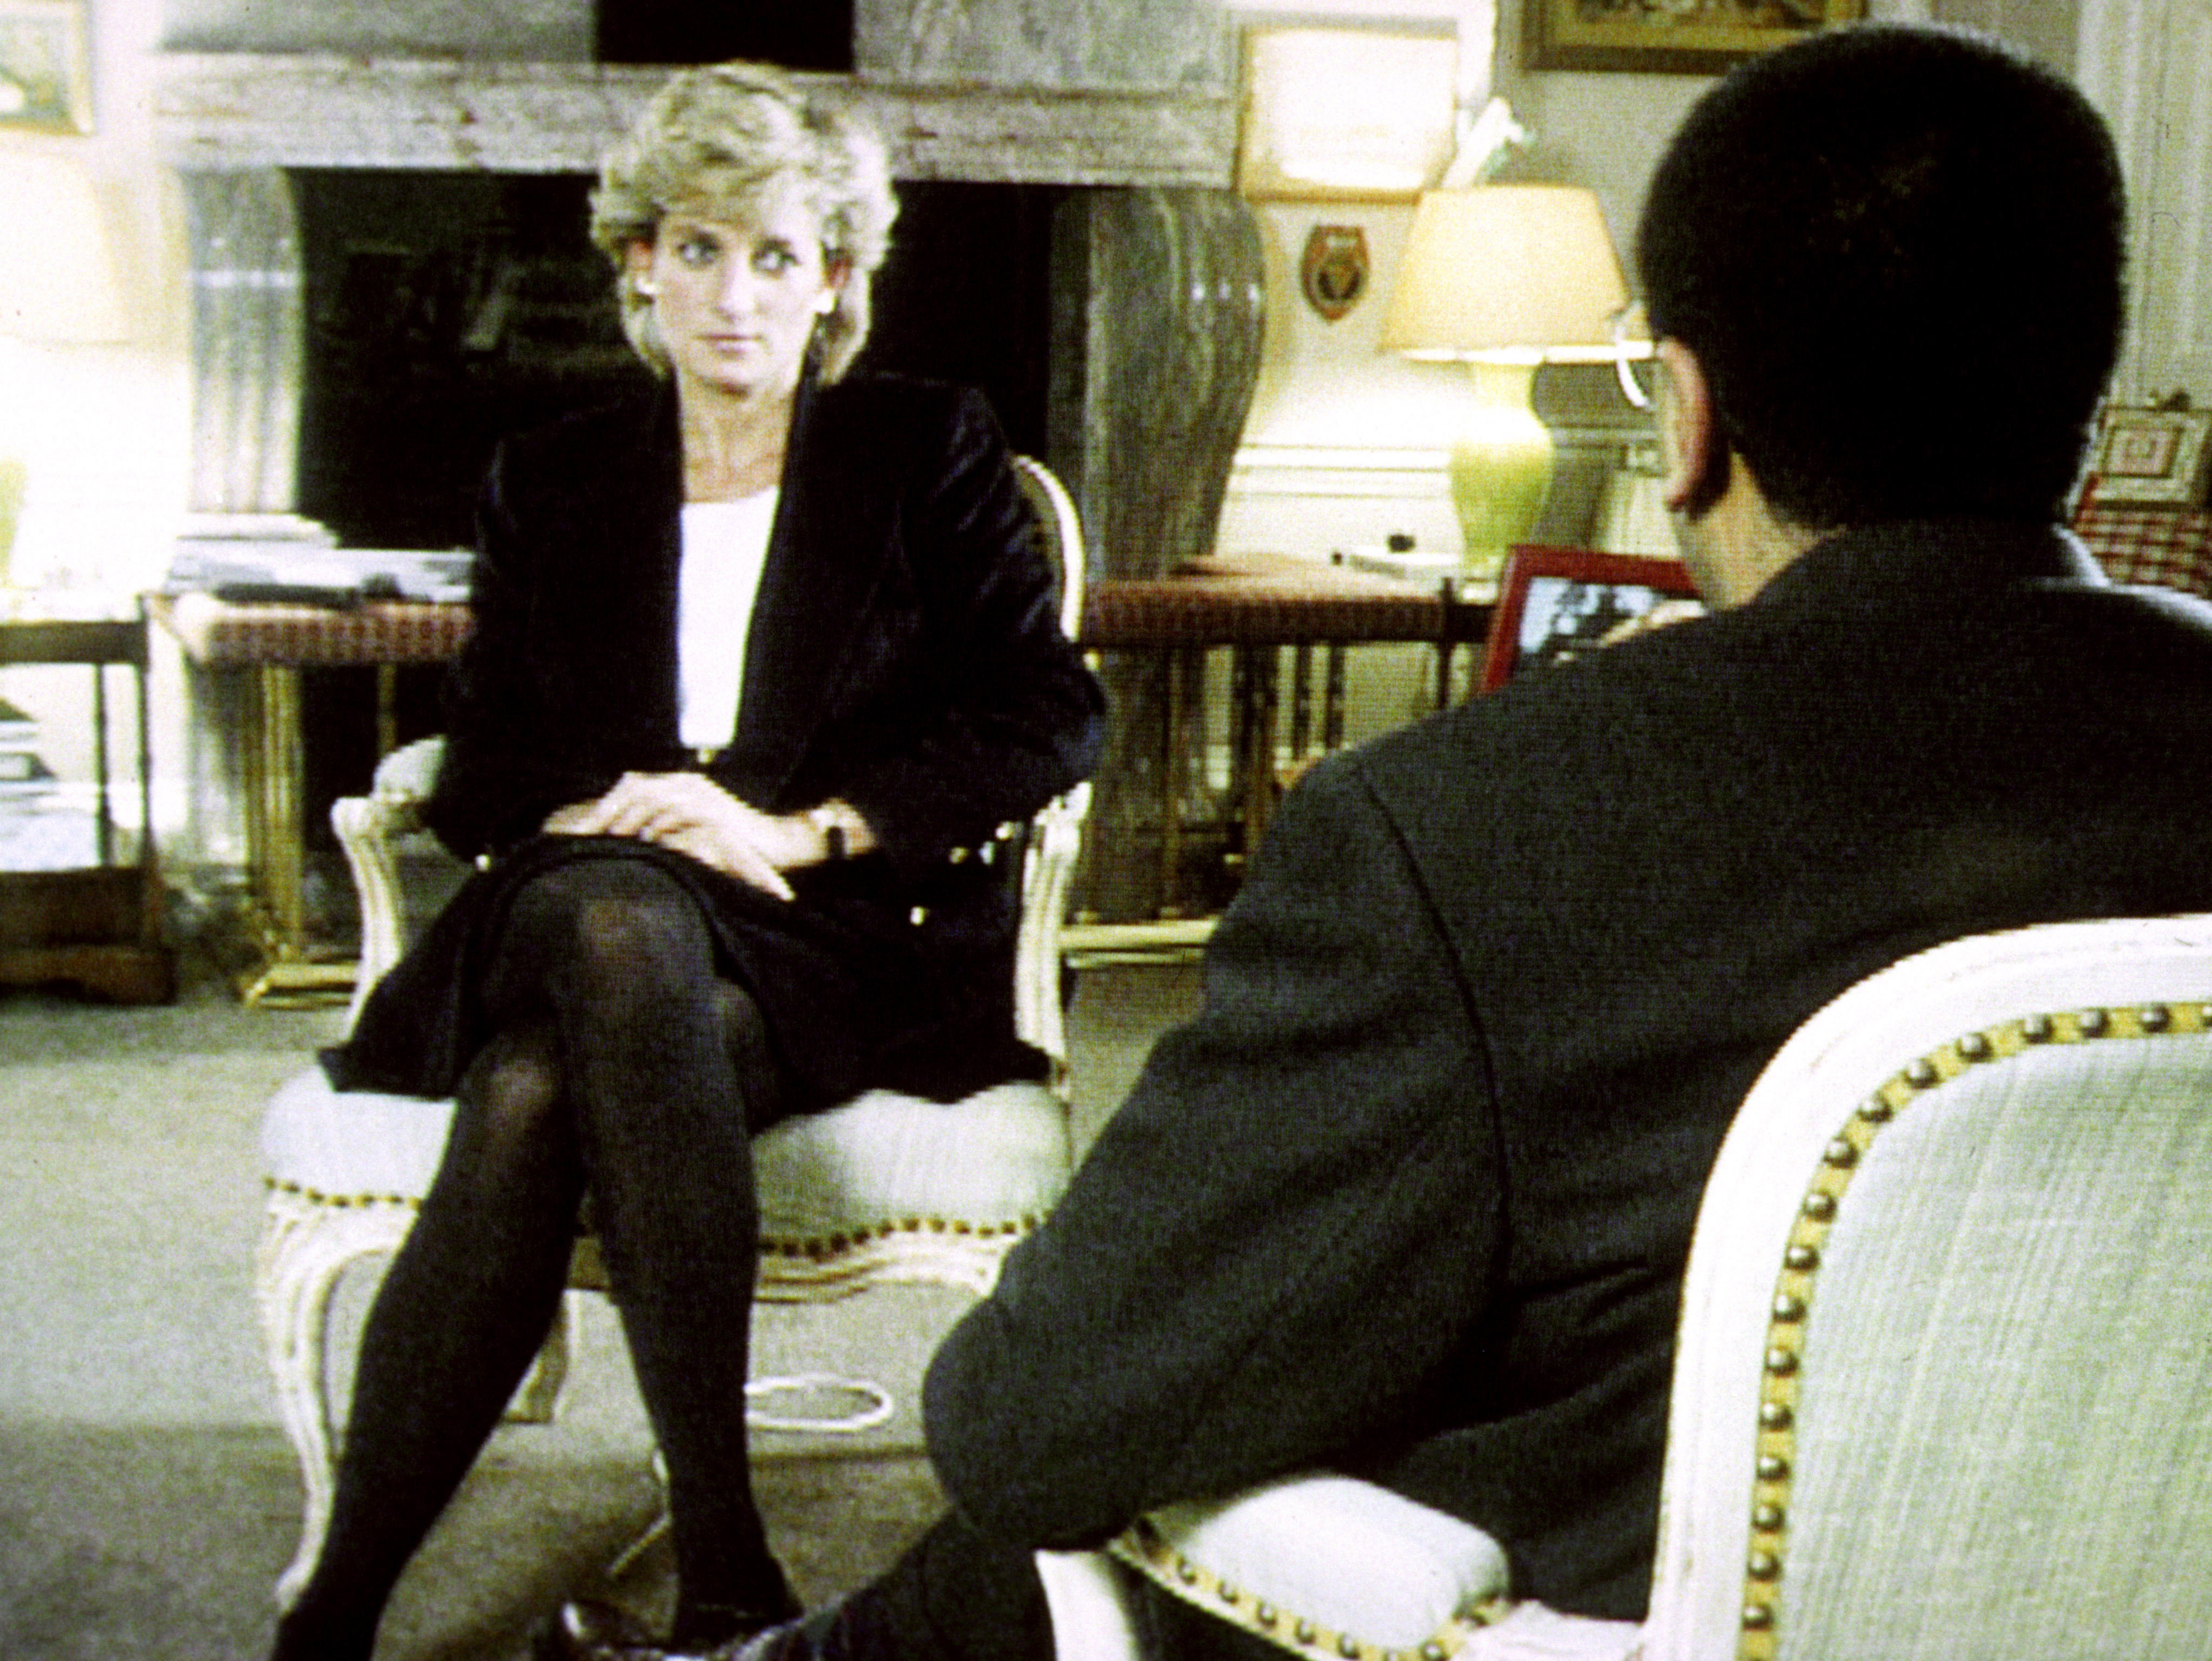 Diana during her interview with Martin Bashir for the BBC.

